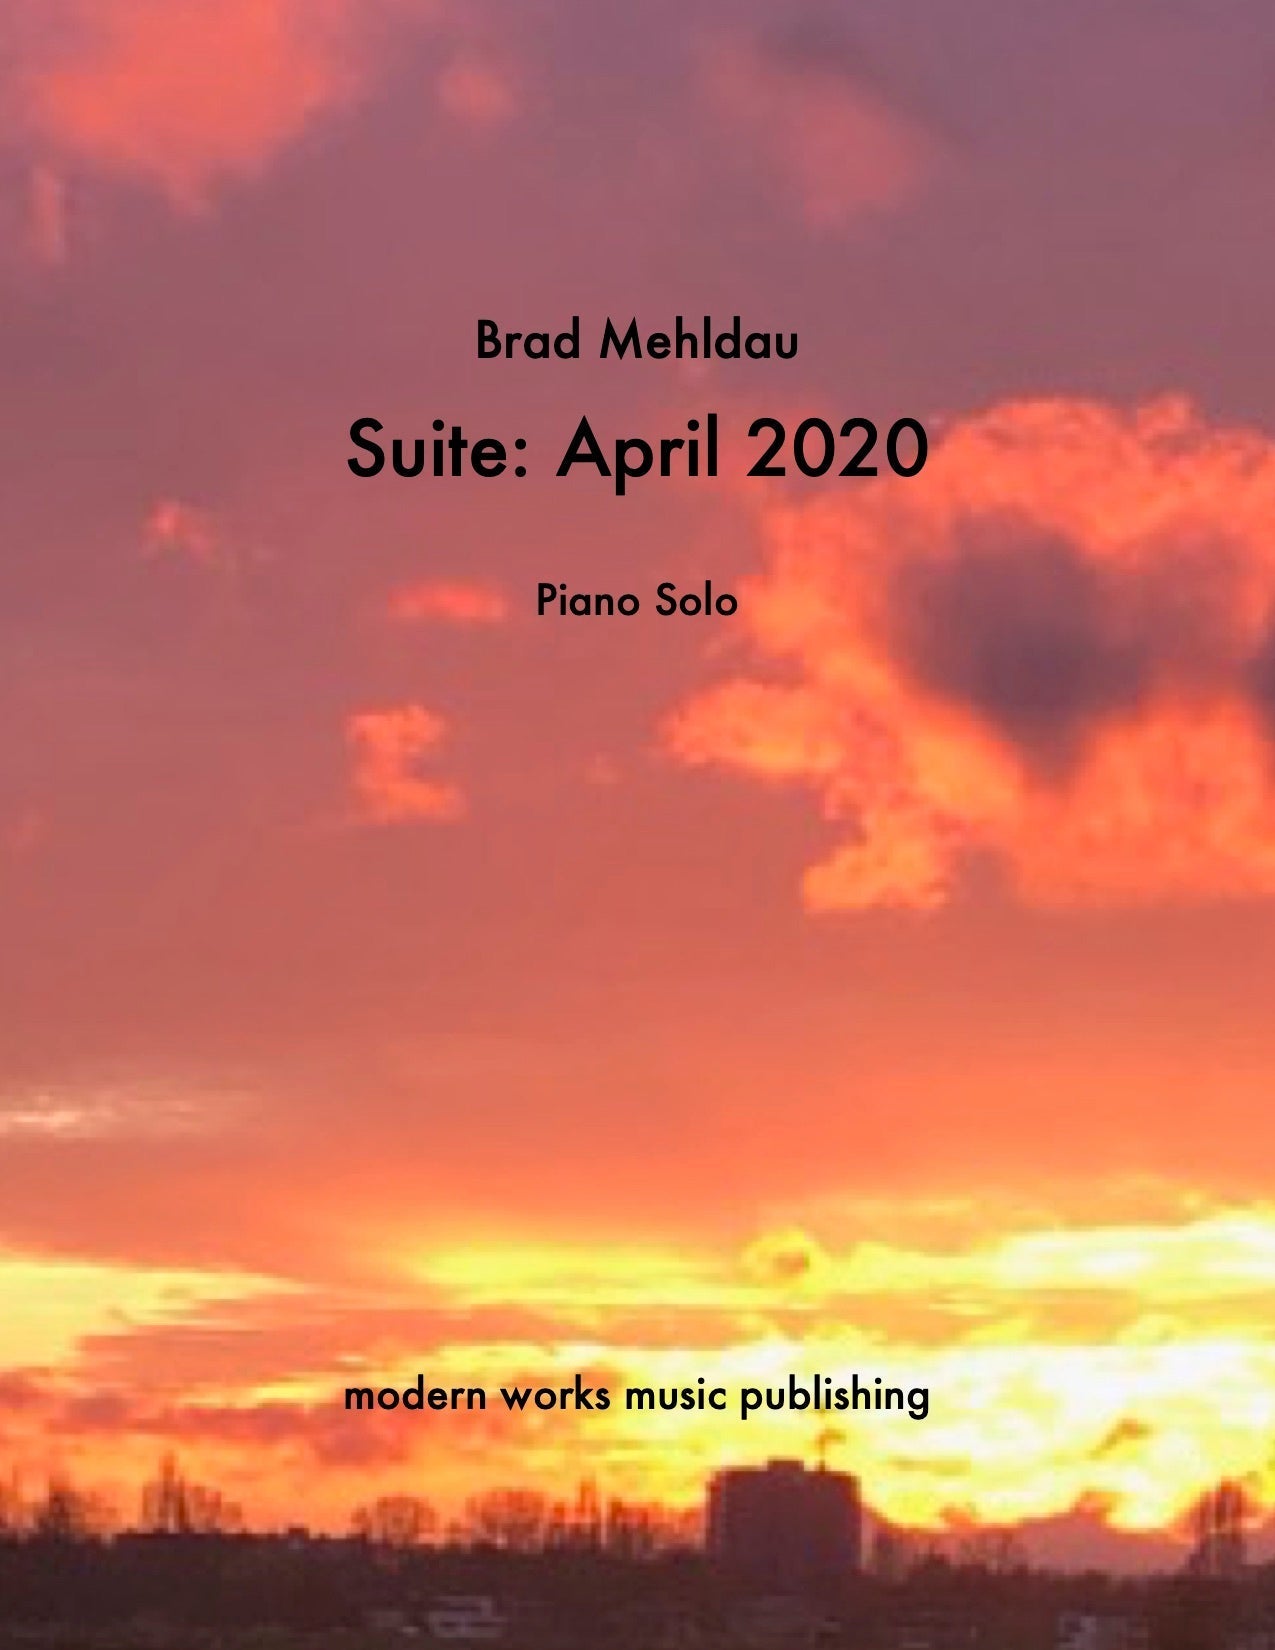 Keeping Distance from Suite: April 2020